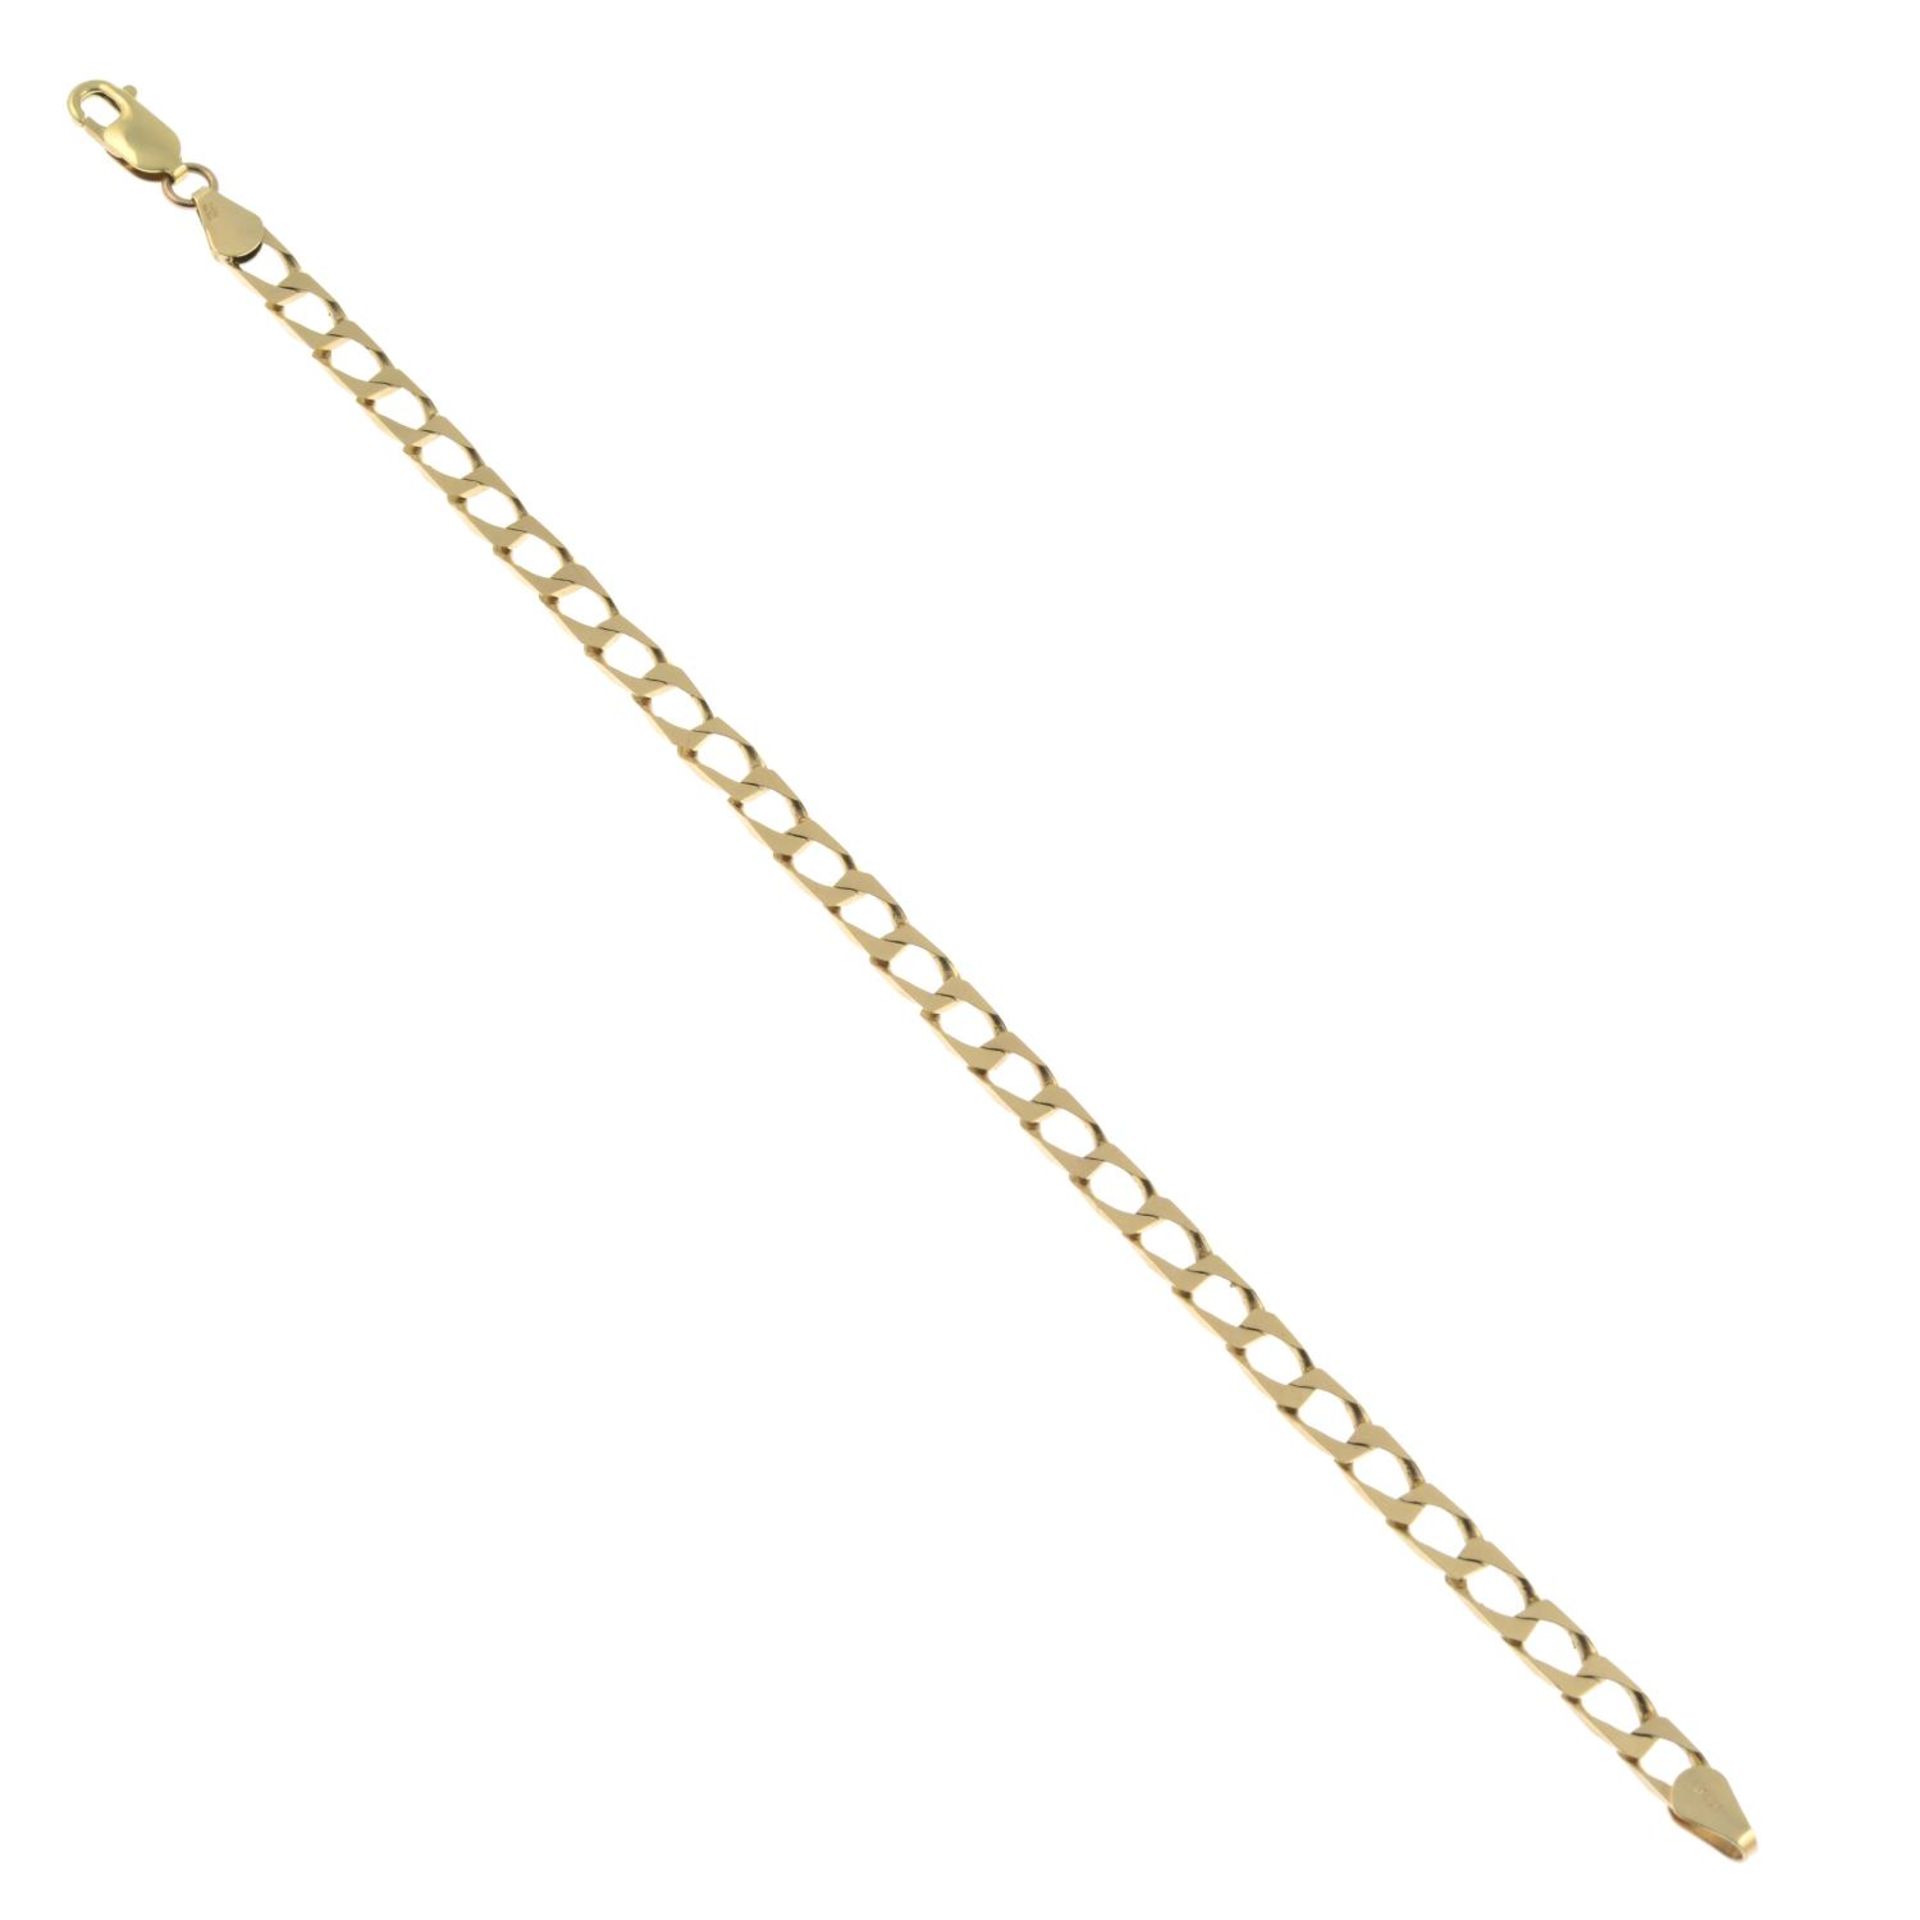 A 9ct gold curb-link chain bracelet.Hallmarks for Sheffield.Length 21cms. - Image 2 of 2